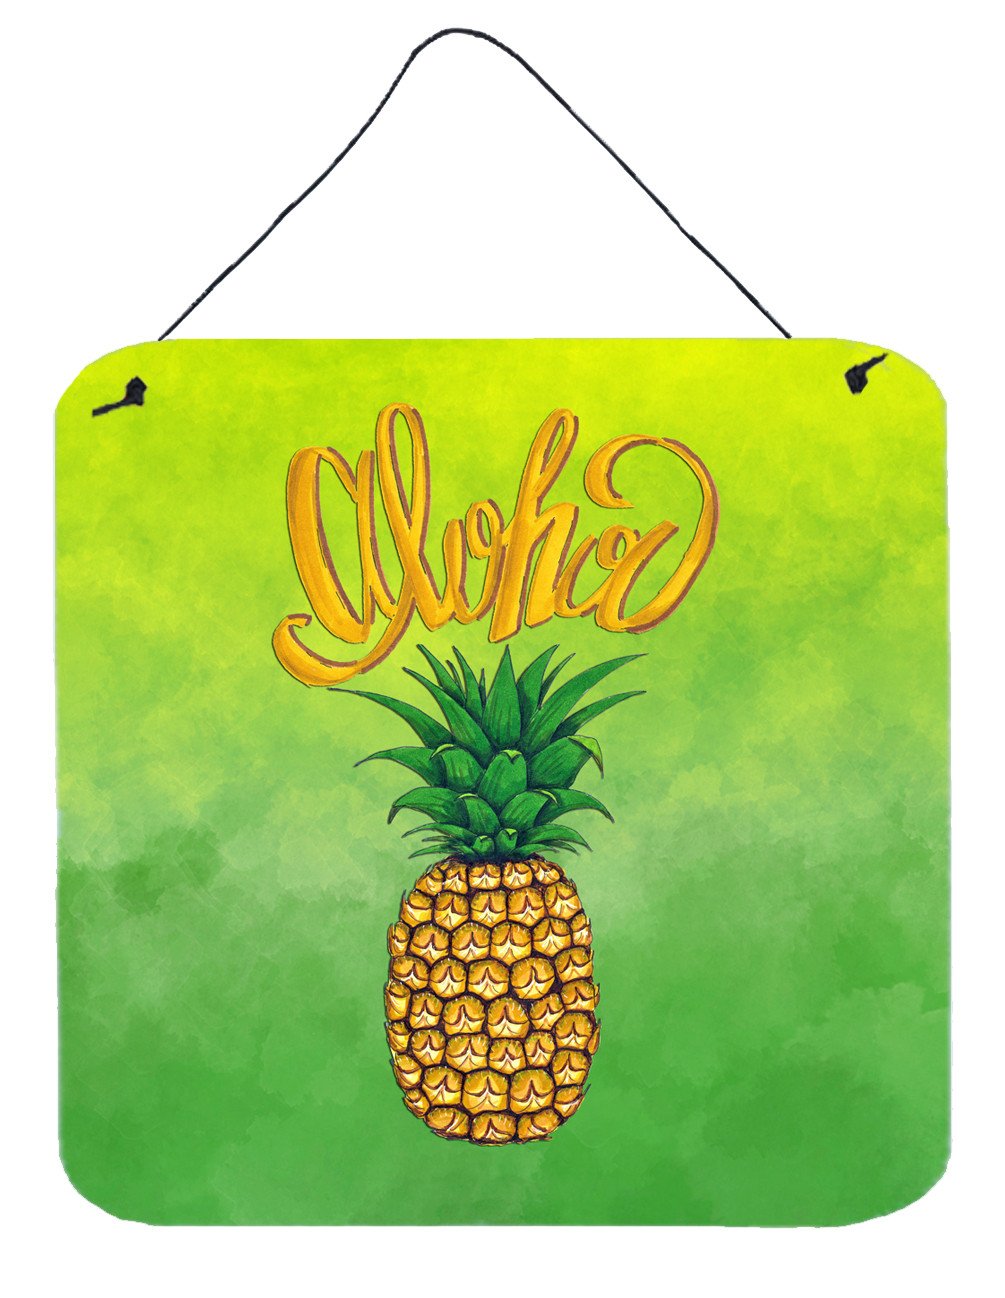 Aloha Pineapple Welcome Wall or Door Hanging Prints BB7451DS66 by Caroline's Treasures